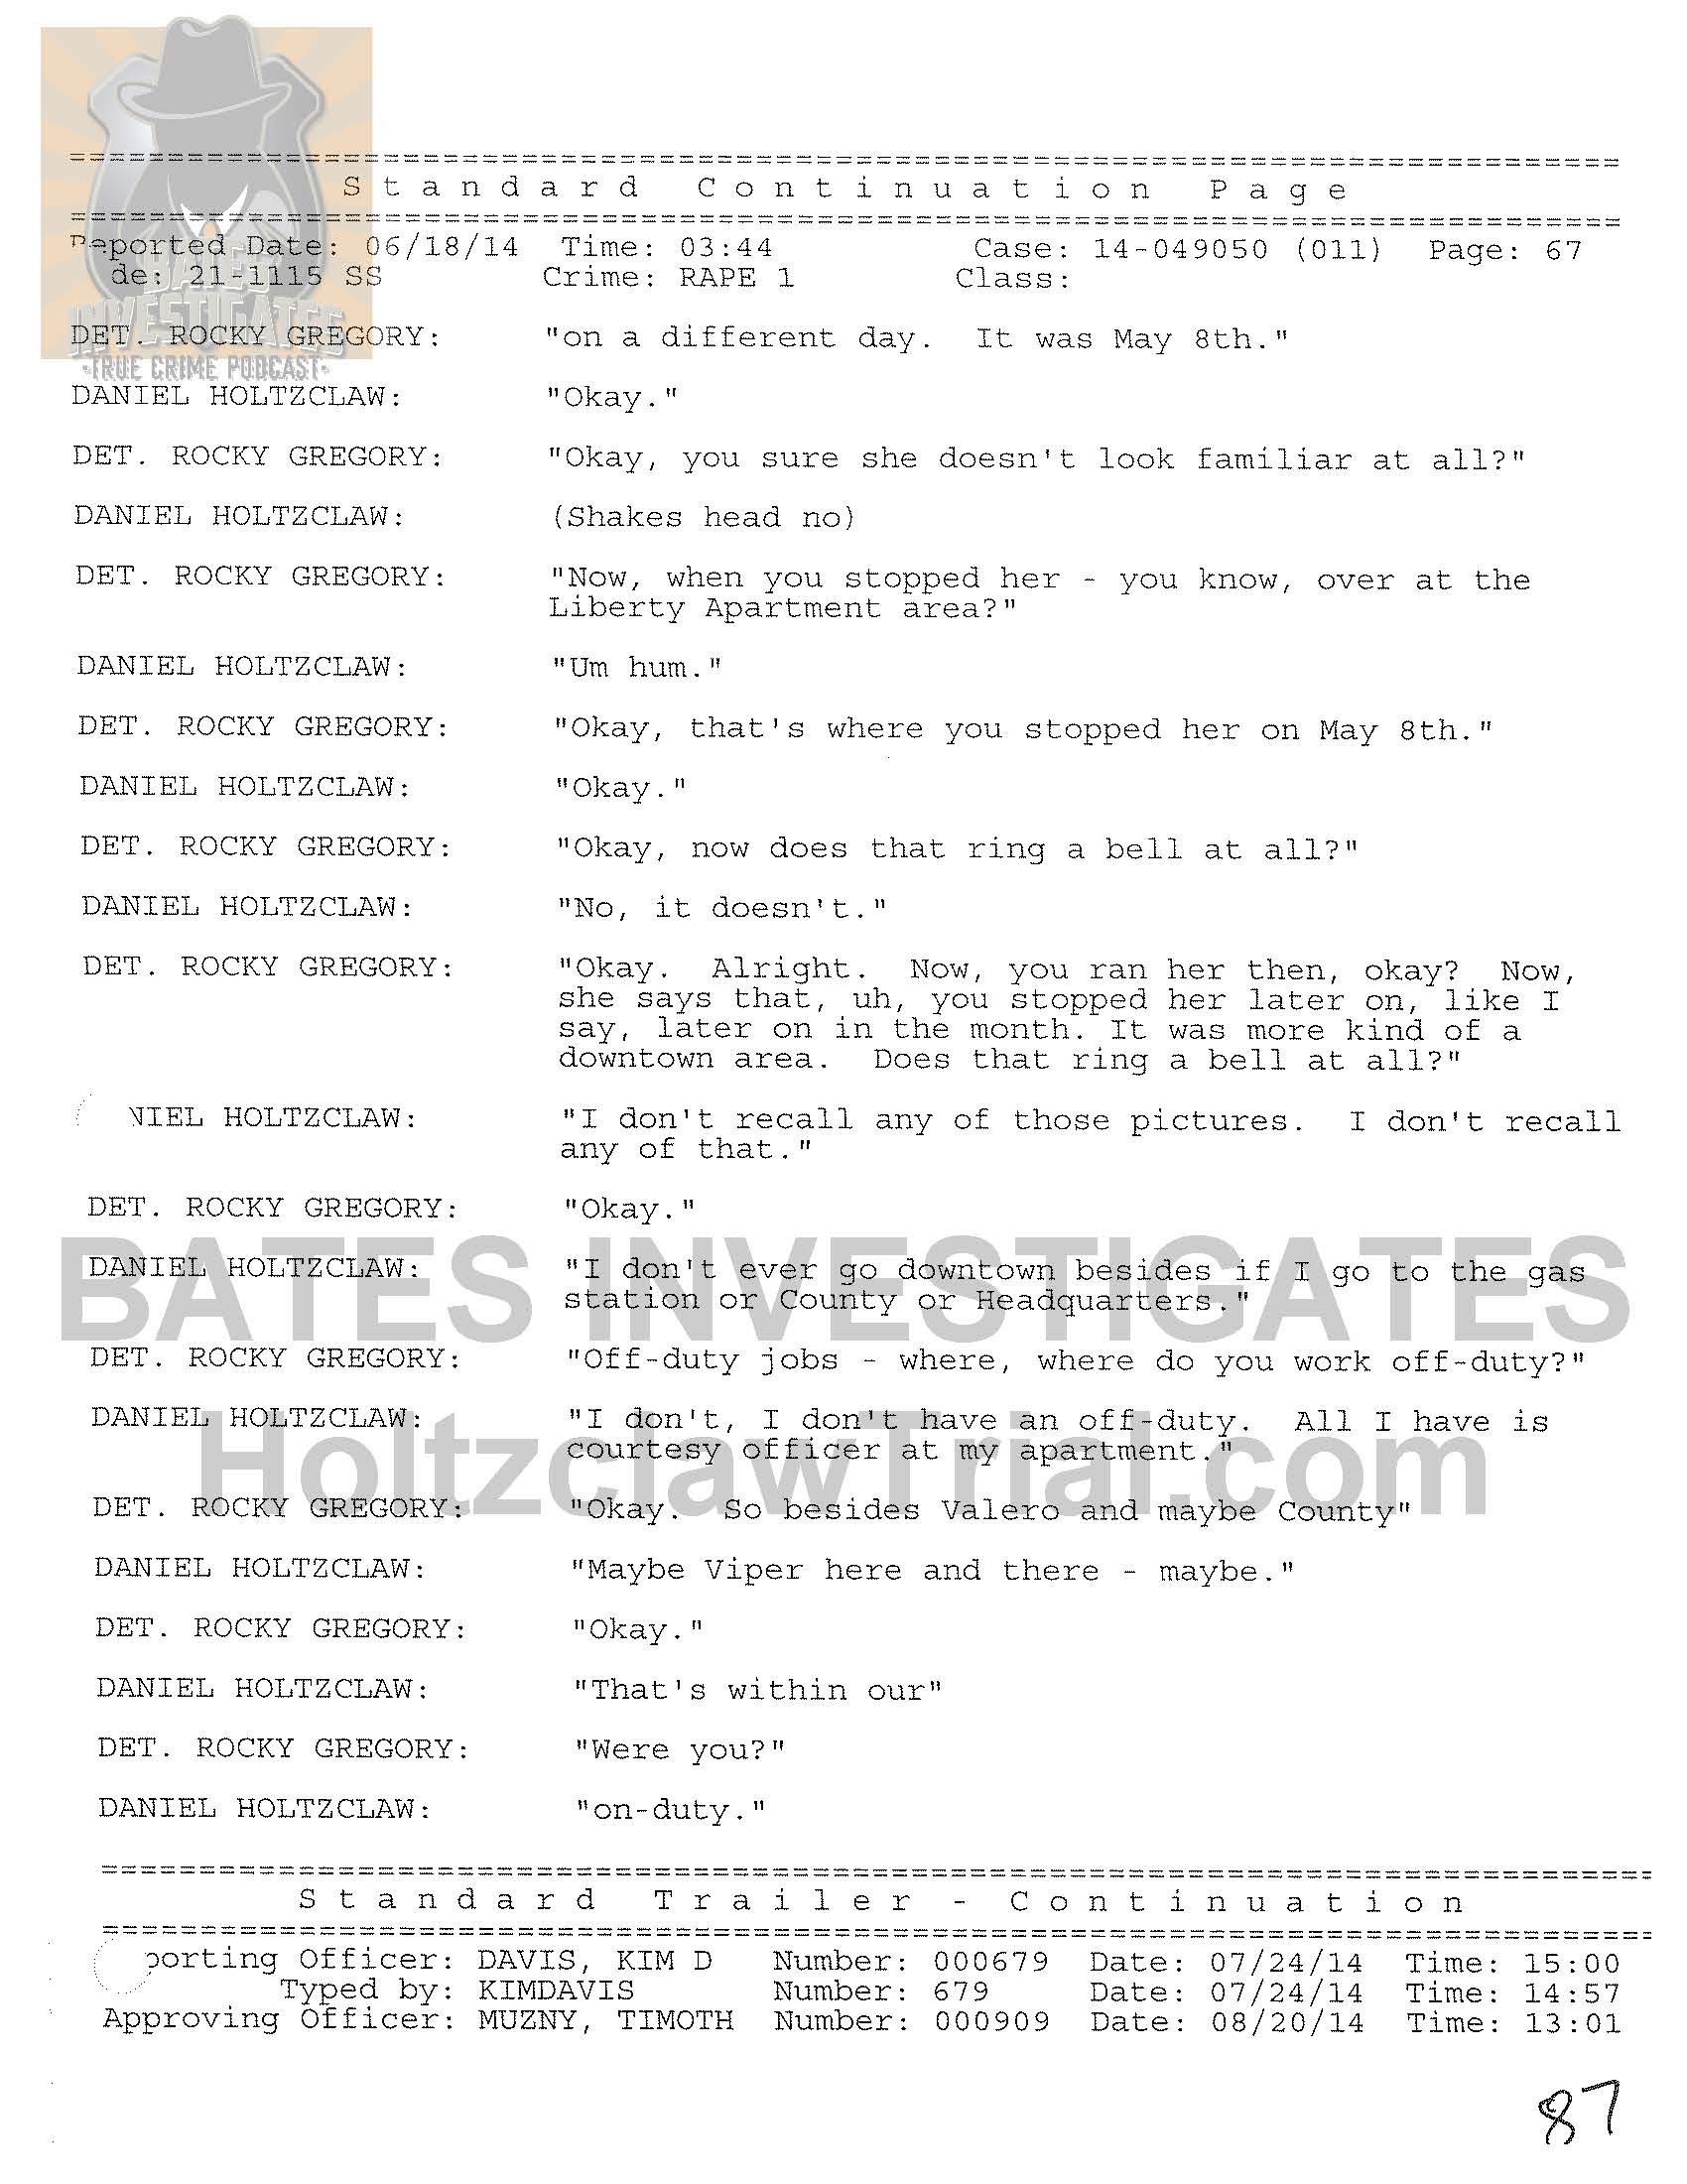 Holtzclaw Interrogation Transcript - Ep02 Redacted_Page_67.jpg